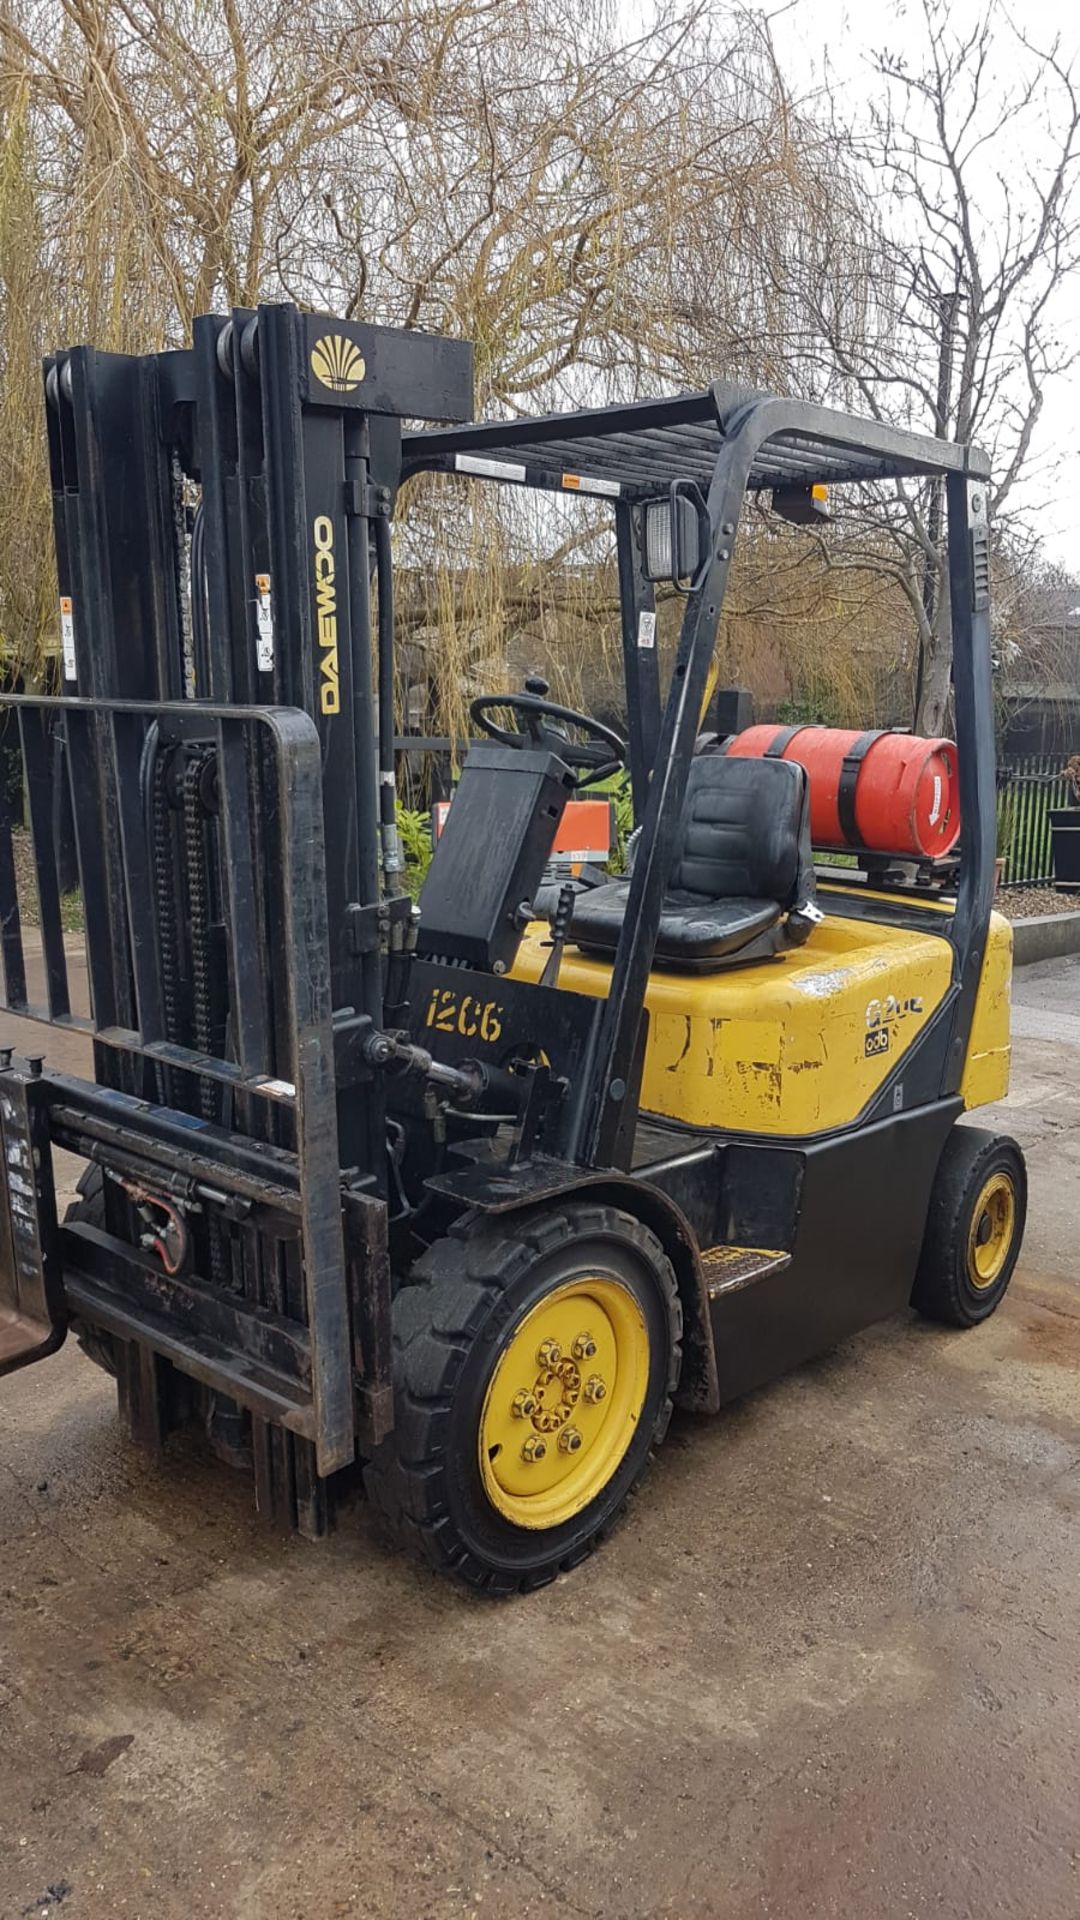 DAEWOO G20 GAS POWERED FORKLIFT TRUCK, YEAR 2004 BUILD, 3 STAGE TRIPLE MAST, SIDE SHIFT, 2 TONNE